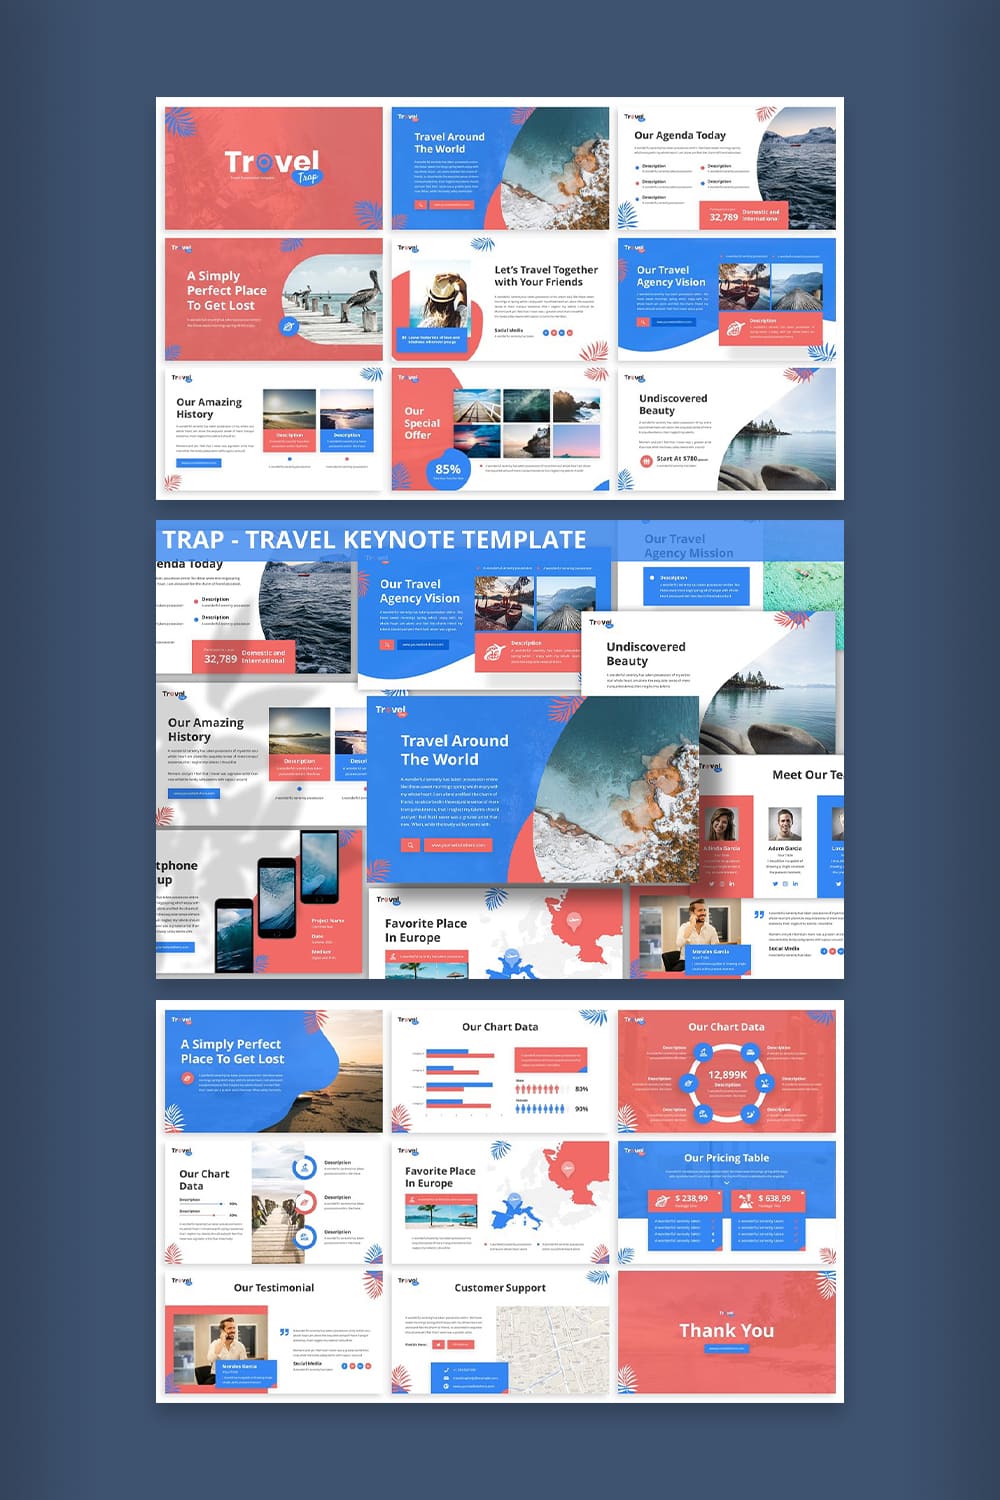 Pinterest image with Trap Travel Keynote Template.